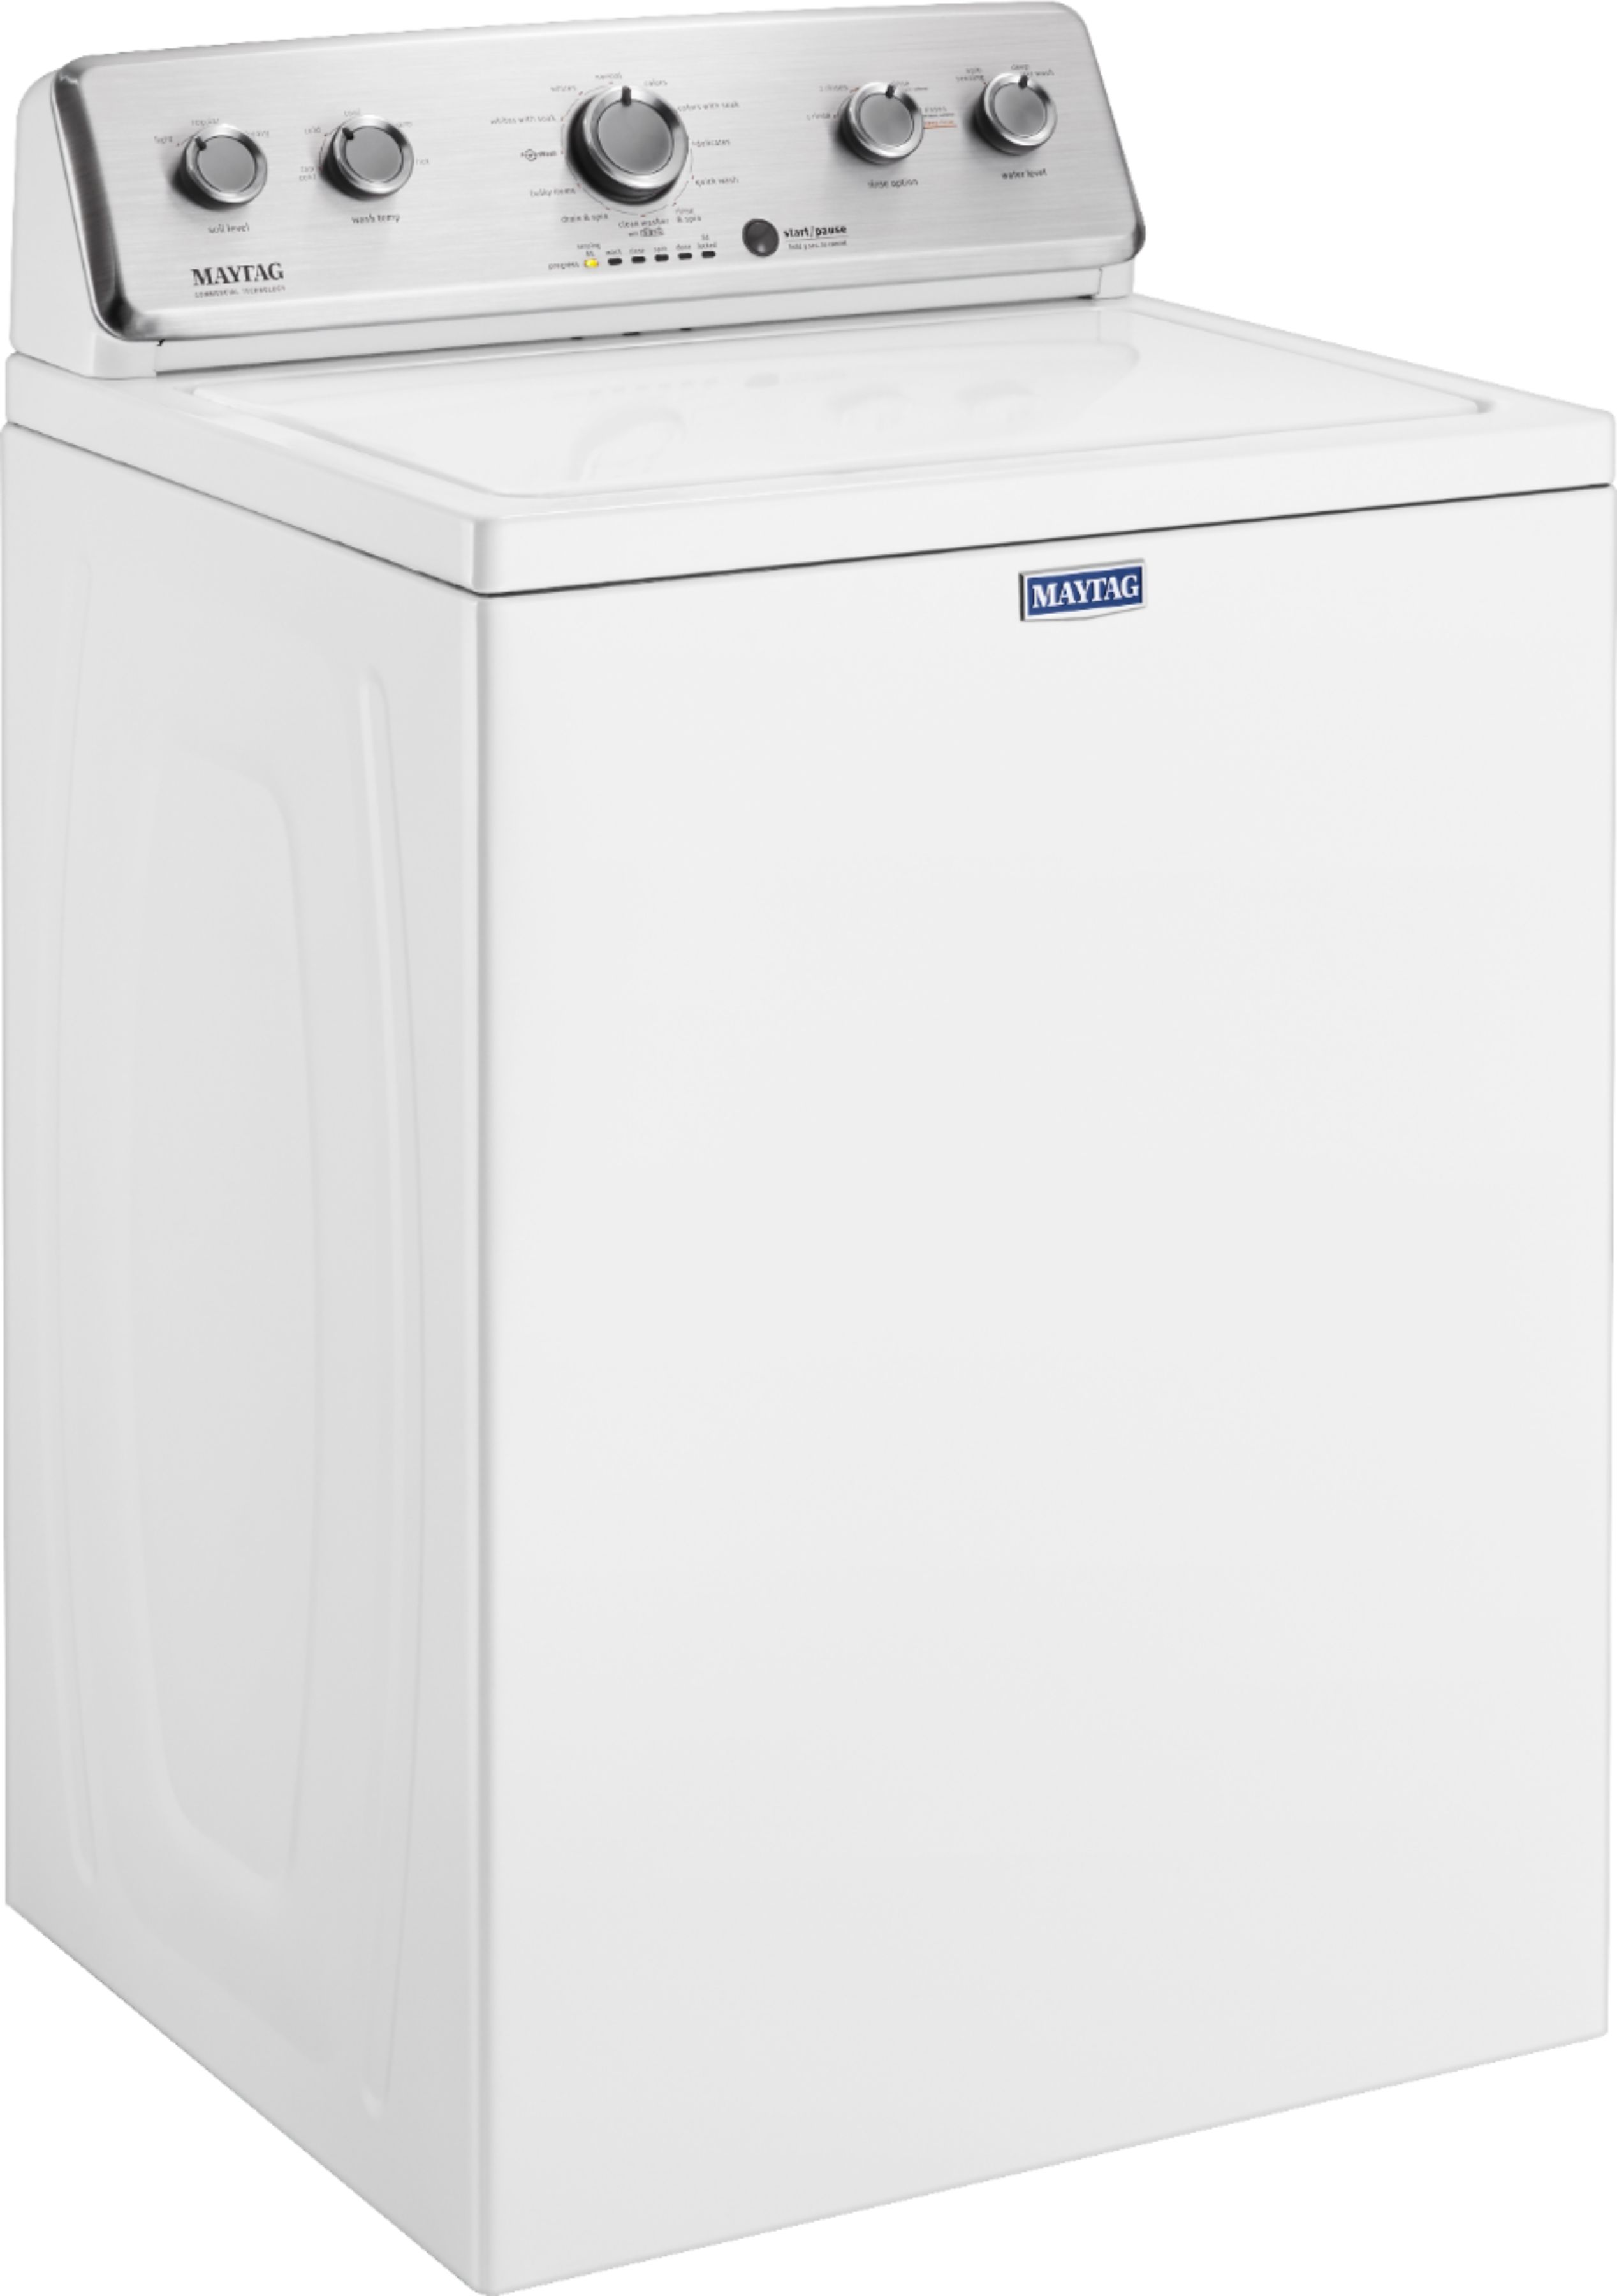 Angle View: Maytag - 3.8 Cu. Ft. High Efficiency Top Load Washer with PowerWash Agitator - White